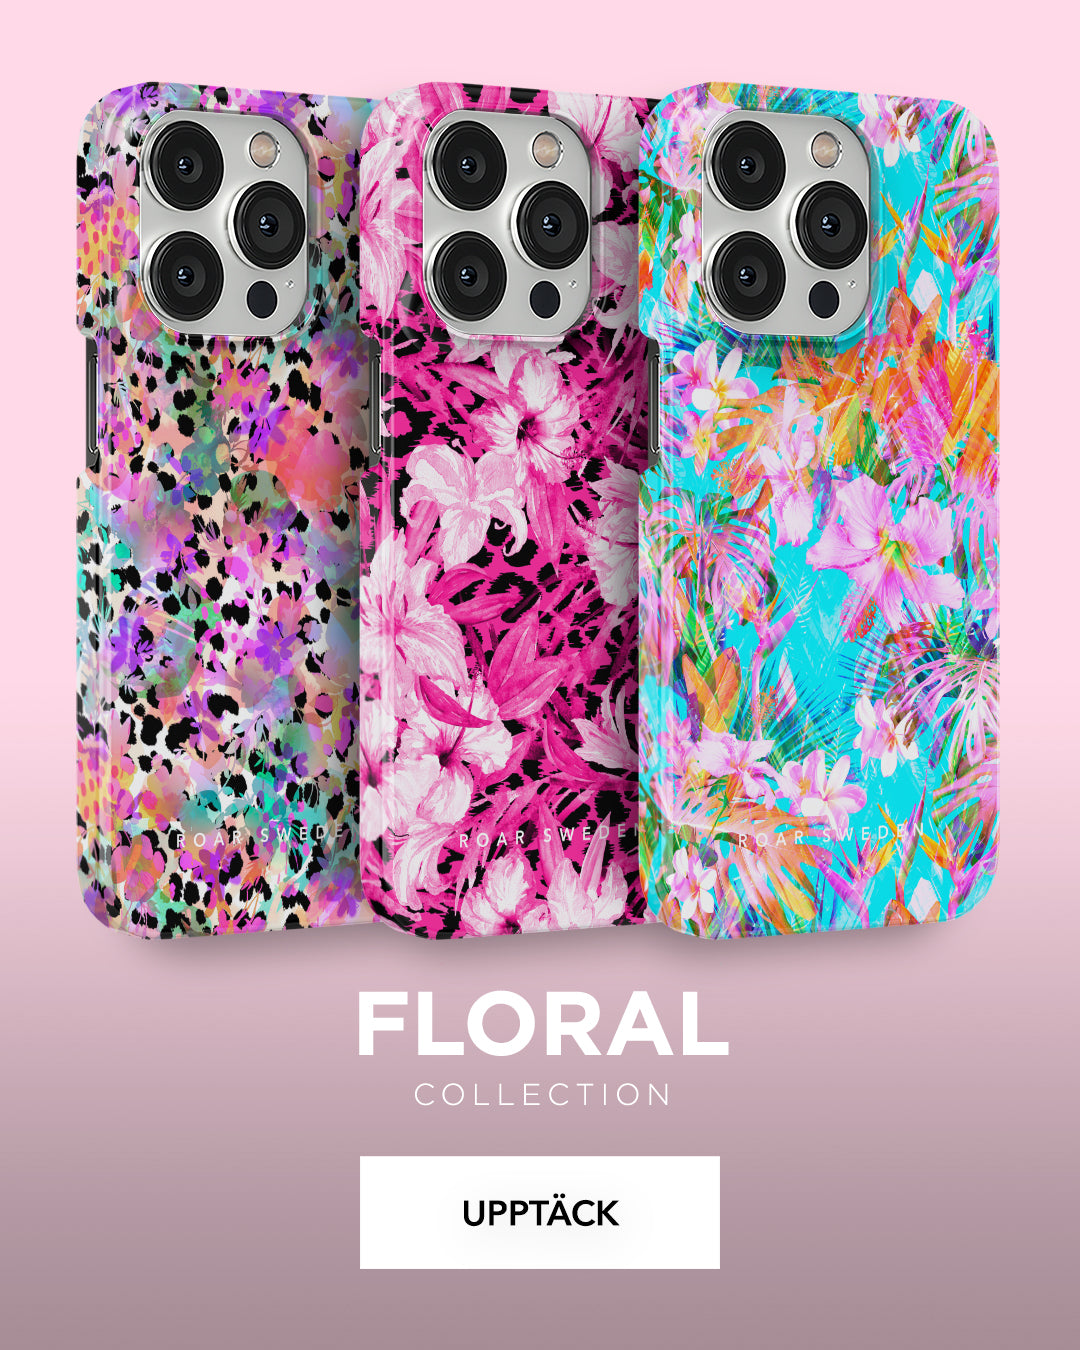 A collection of smartphone cases with vibrant floral patterns.